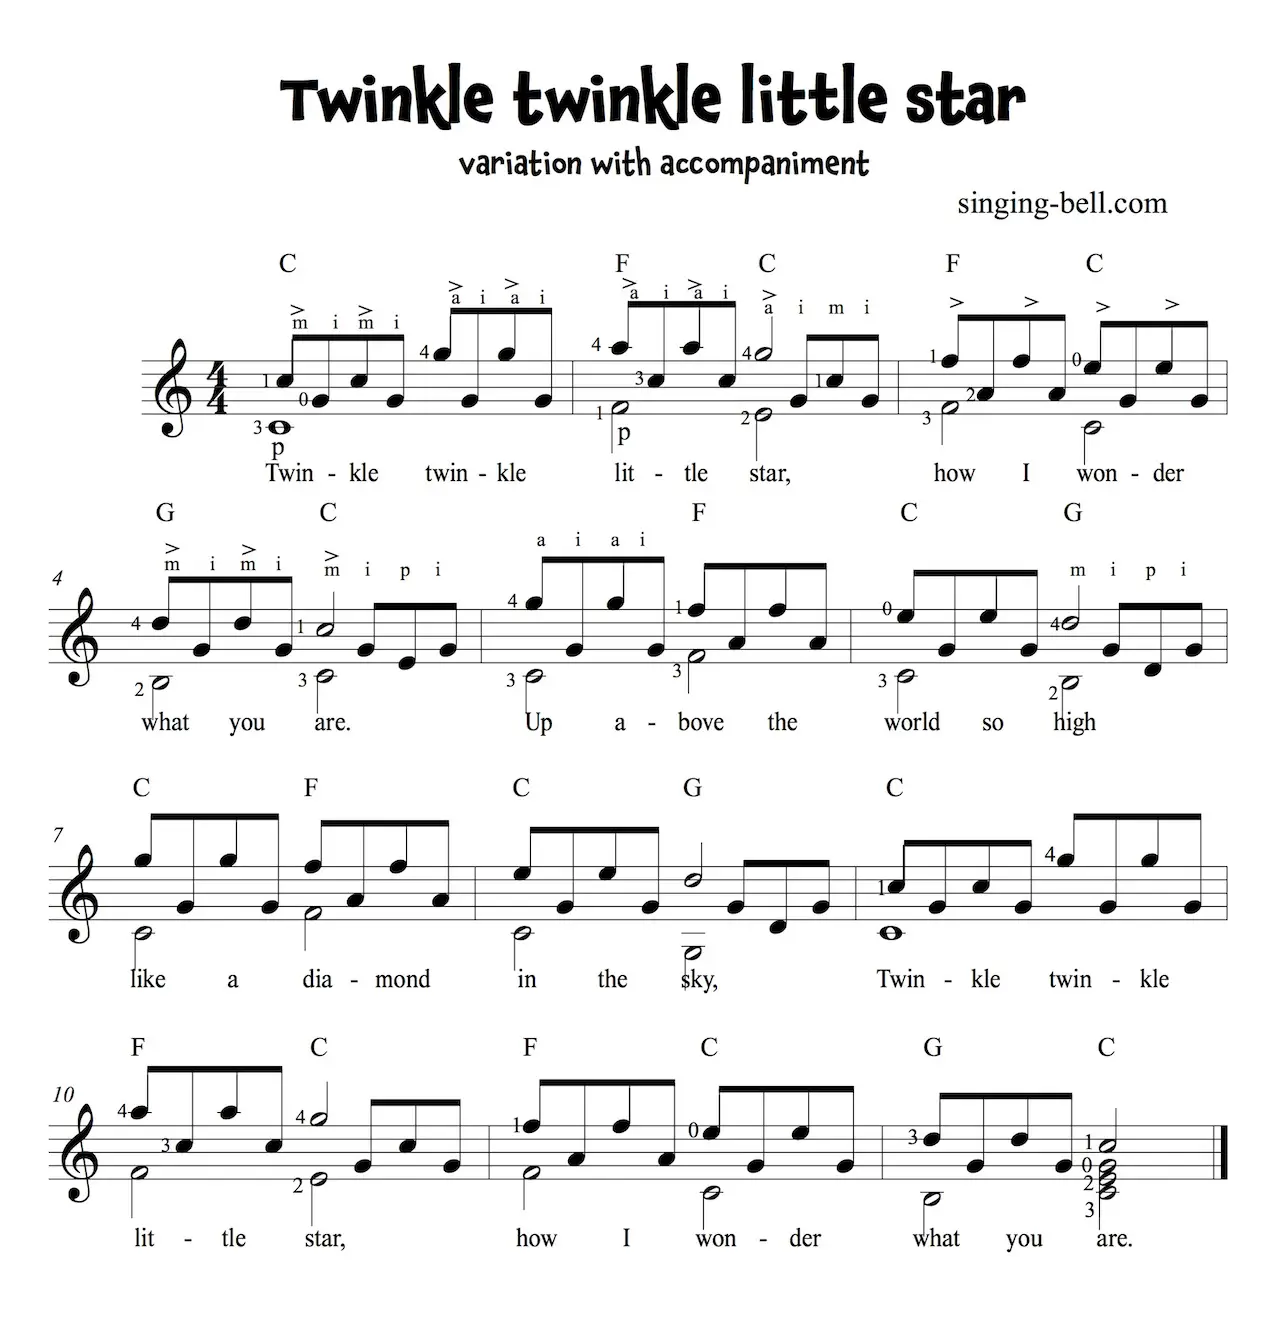 Twinkle twinkle little star Variation with accompaniment Easy Beginners Guitar Sheet Music with chords in C major.